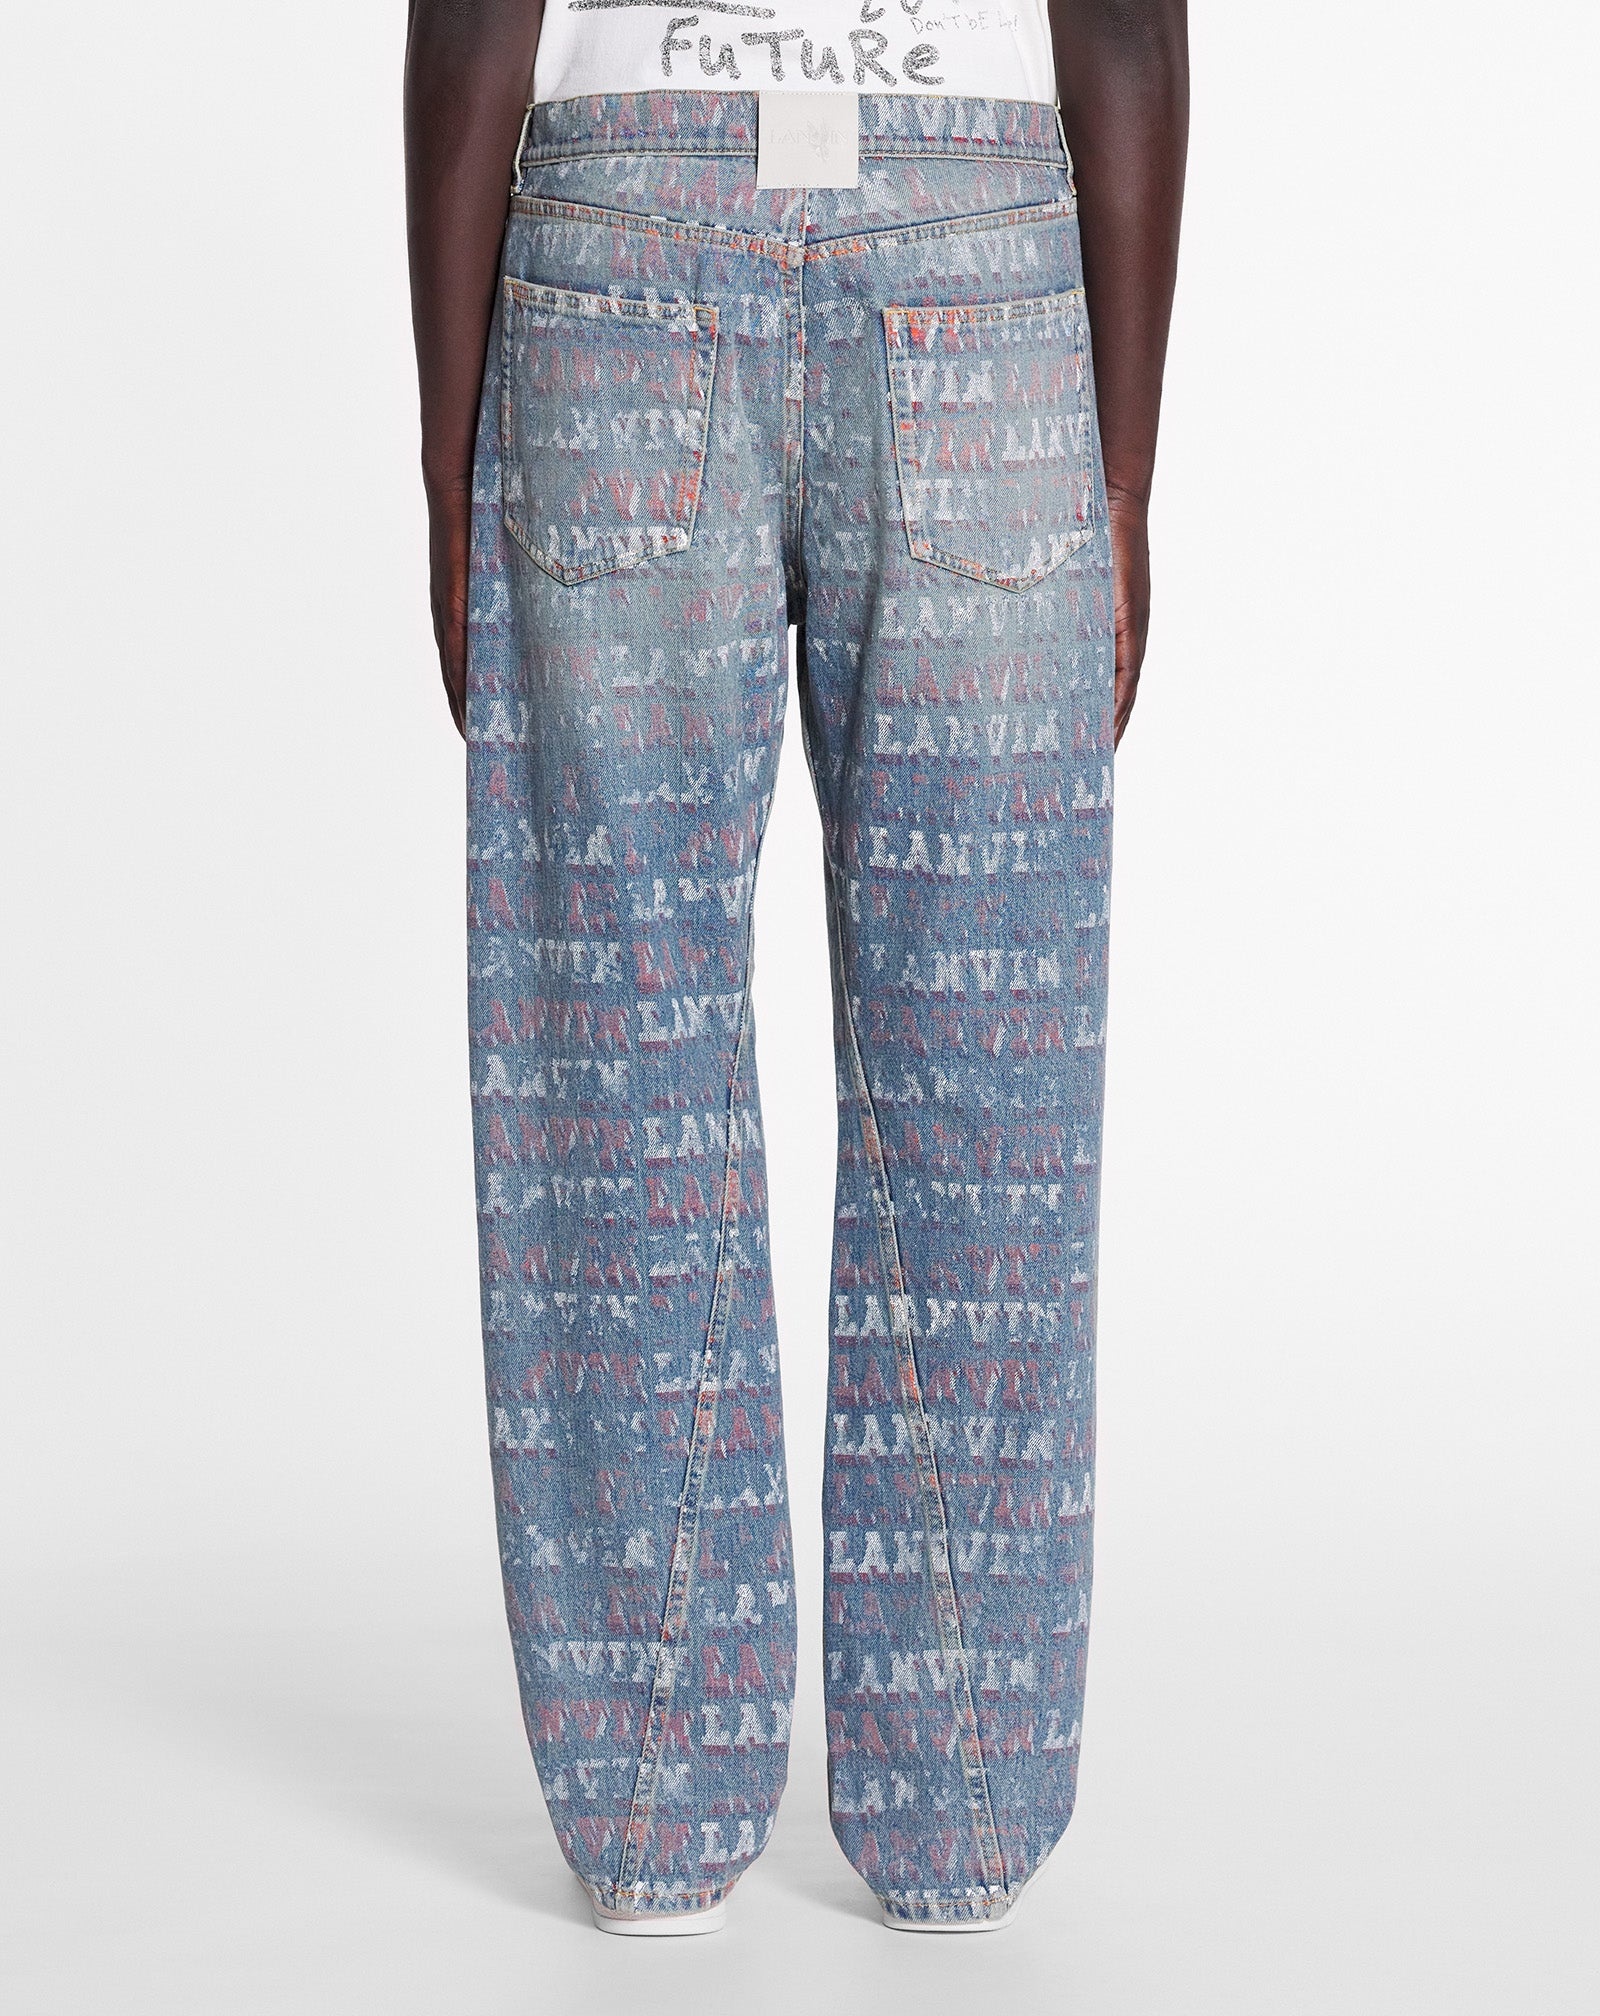 LANVIN X FUTURE STRAIGHT FIT PRINTED PANTS FOR MEN - 4